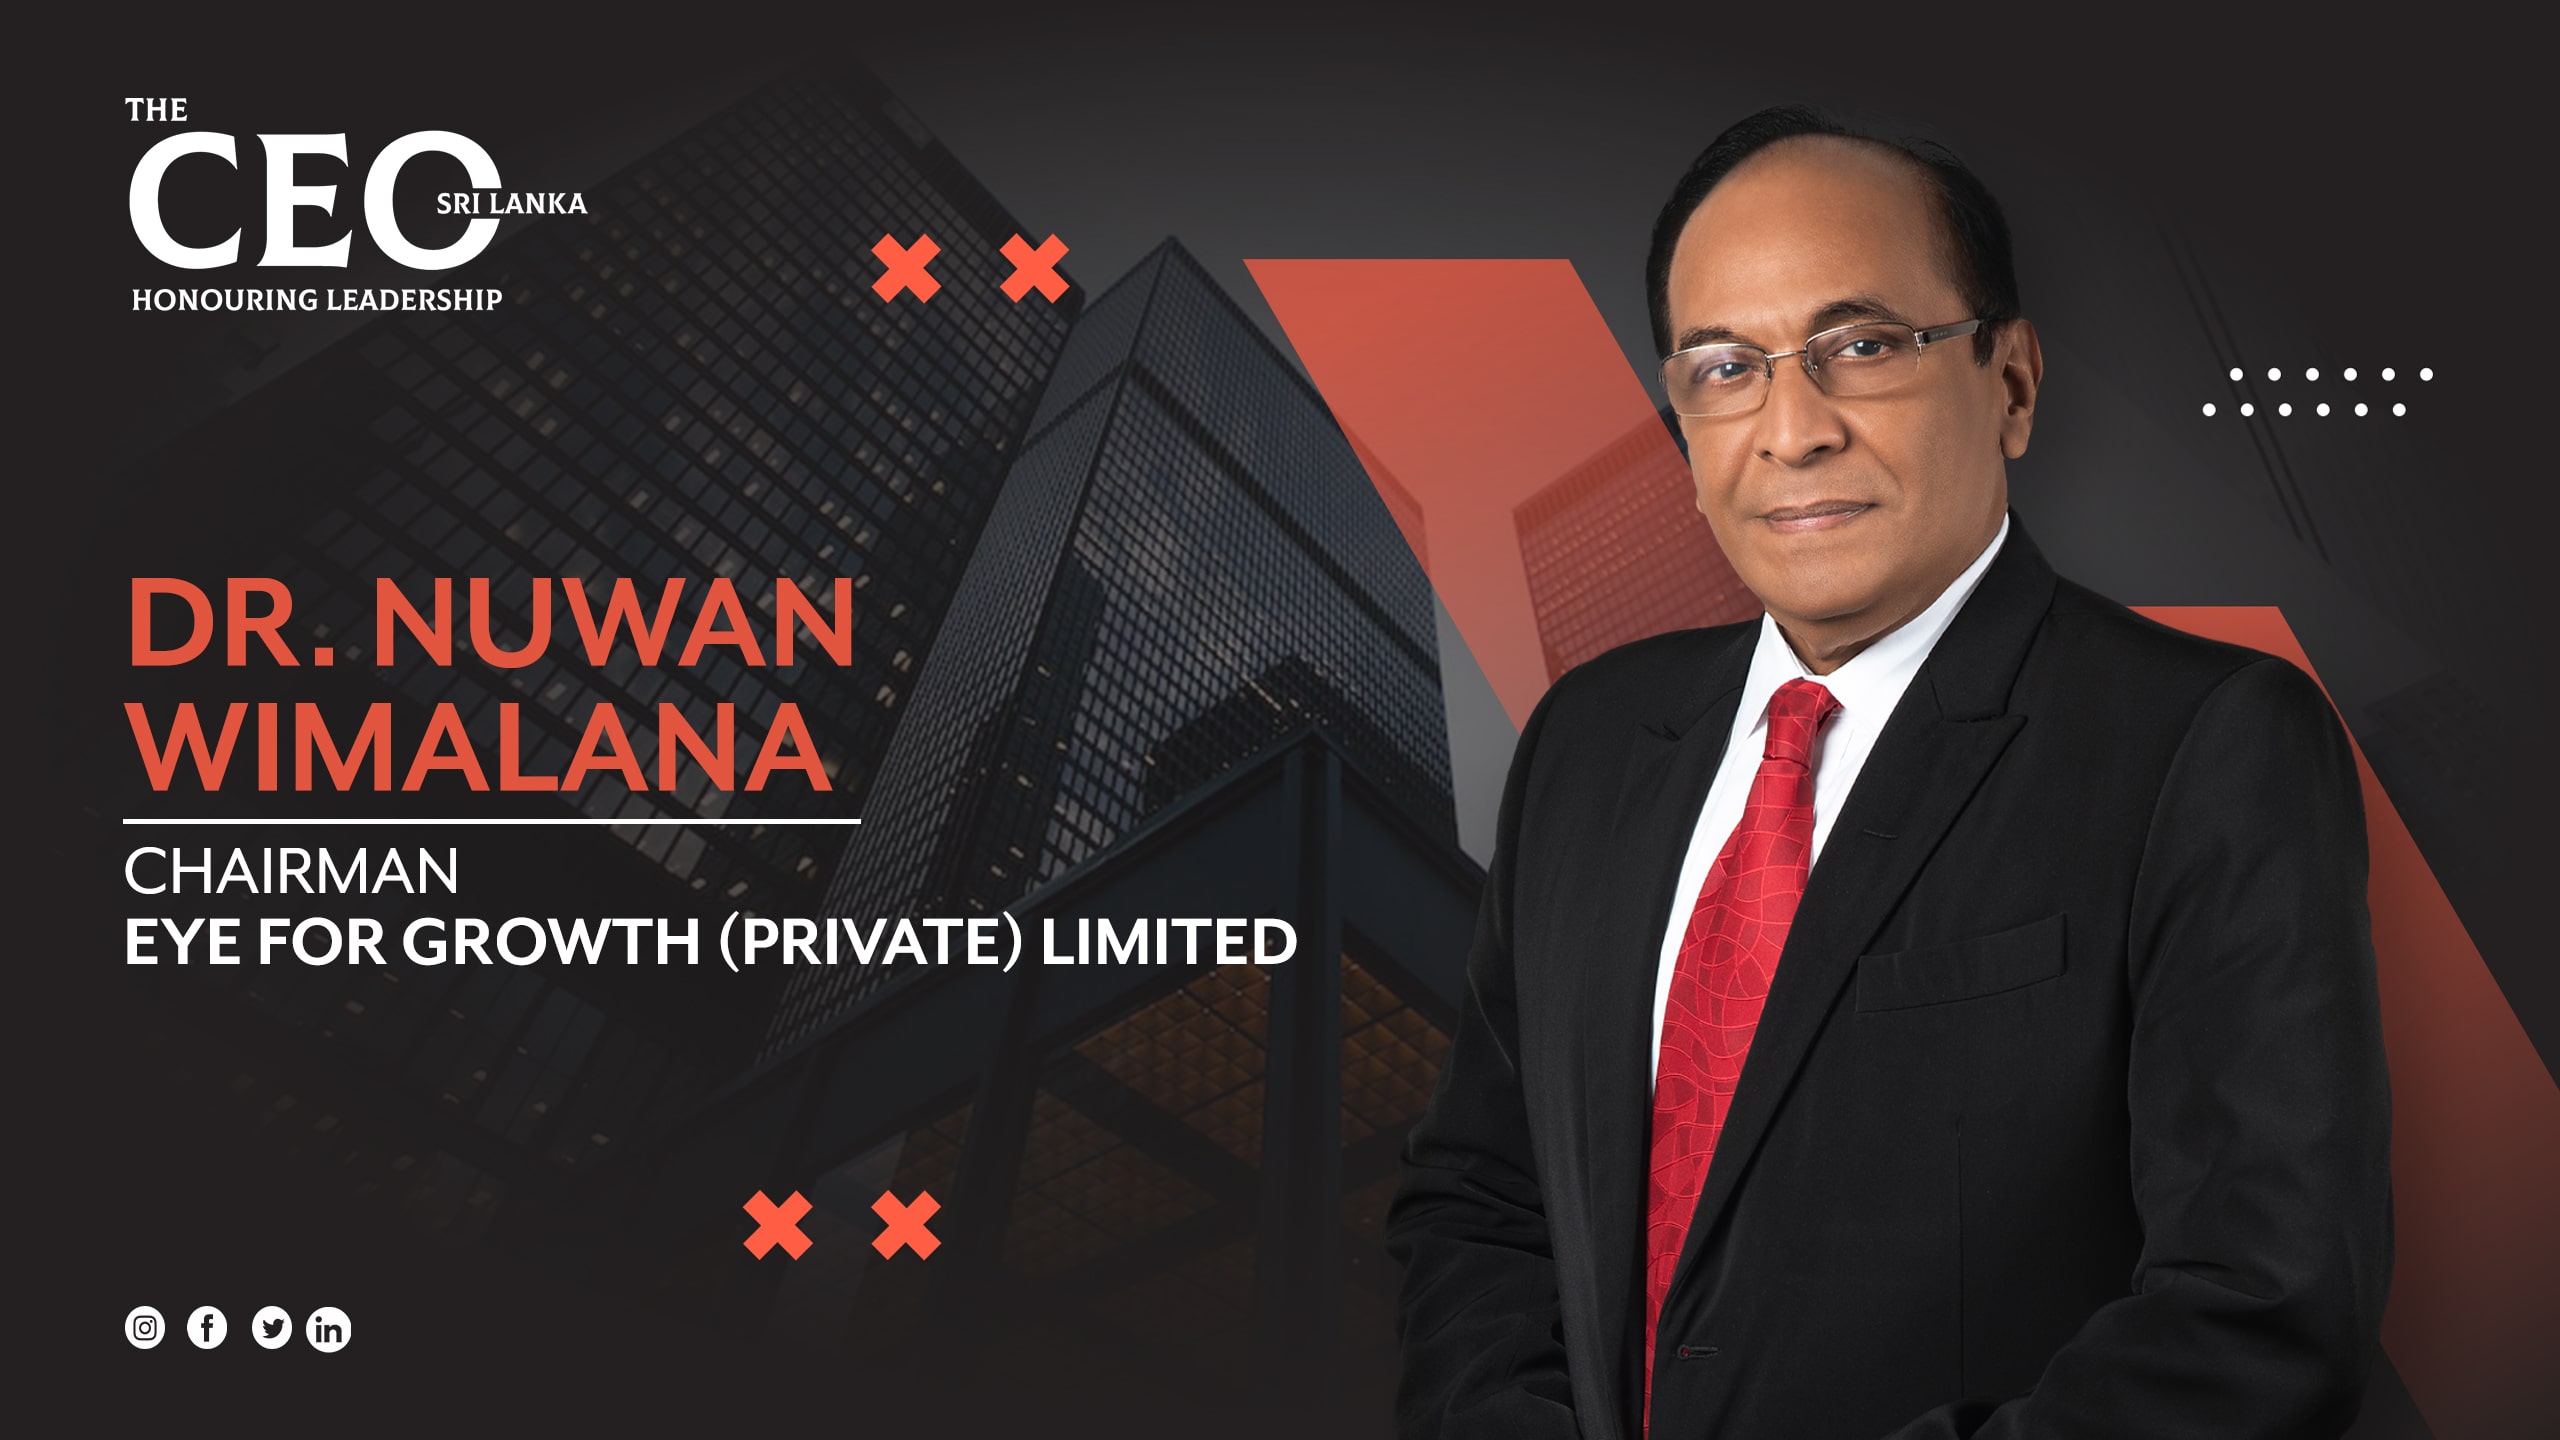 DRIVING BUSINESS TRANSFORMATIONS AMID THE ECONOMIC CRISIS – CHAIRMAN OF EYE FOR GROWTH (PRIVATE) LIMITED, DR. NUWAN WIMALANA